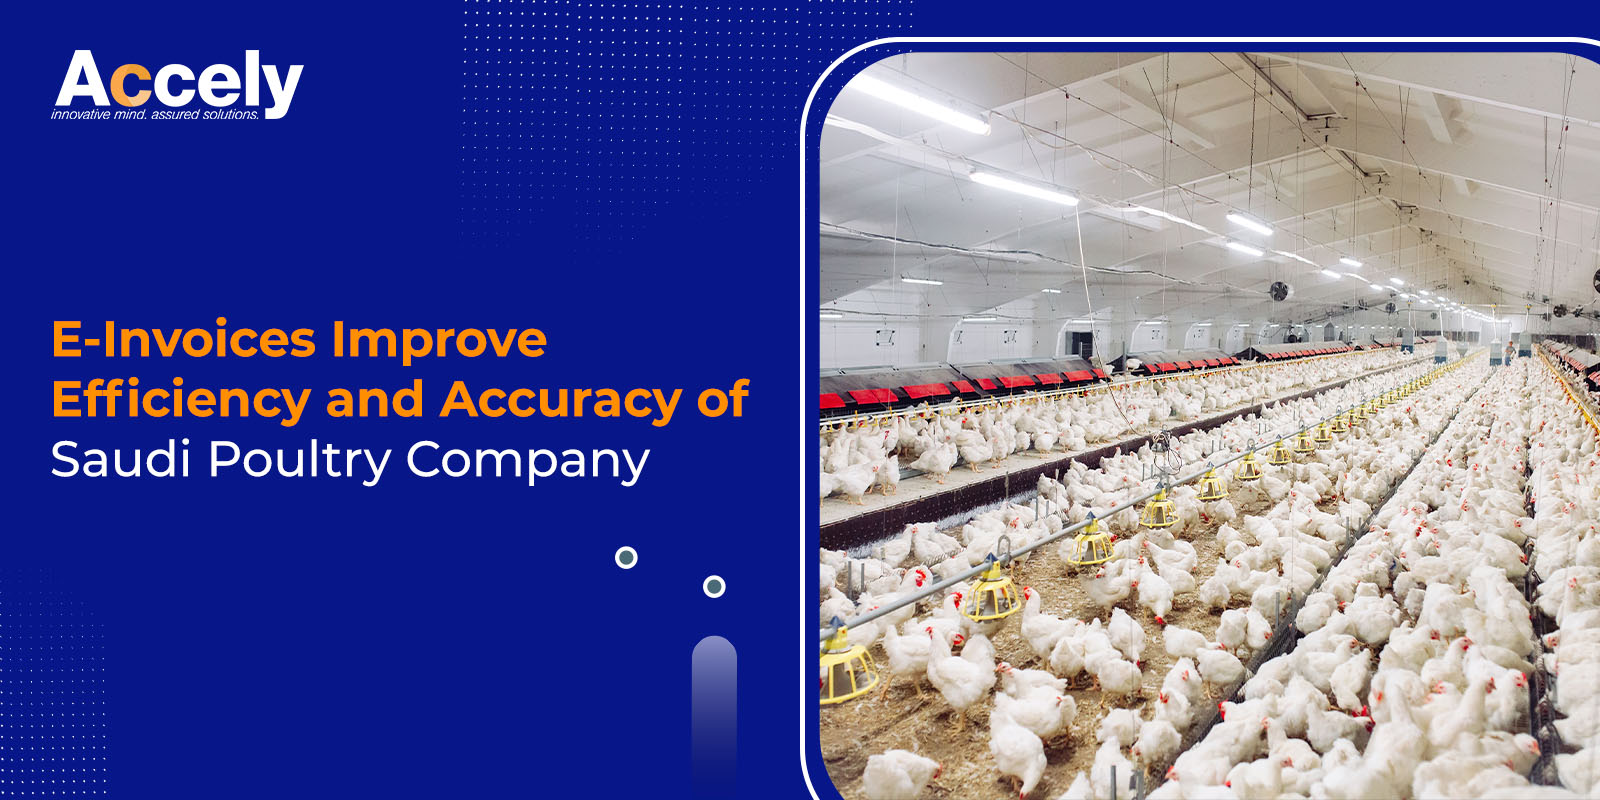 E-Invoices Improve Efficiency and Accuracy of Saudi Poultry Company